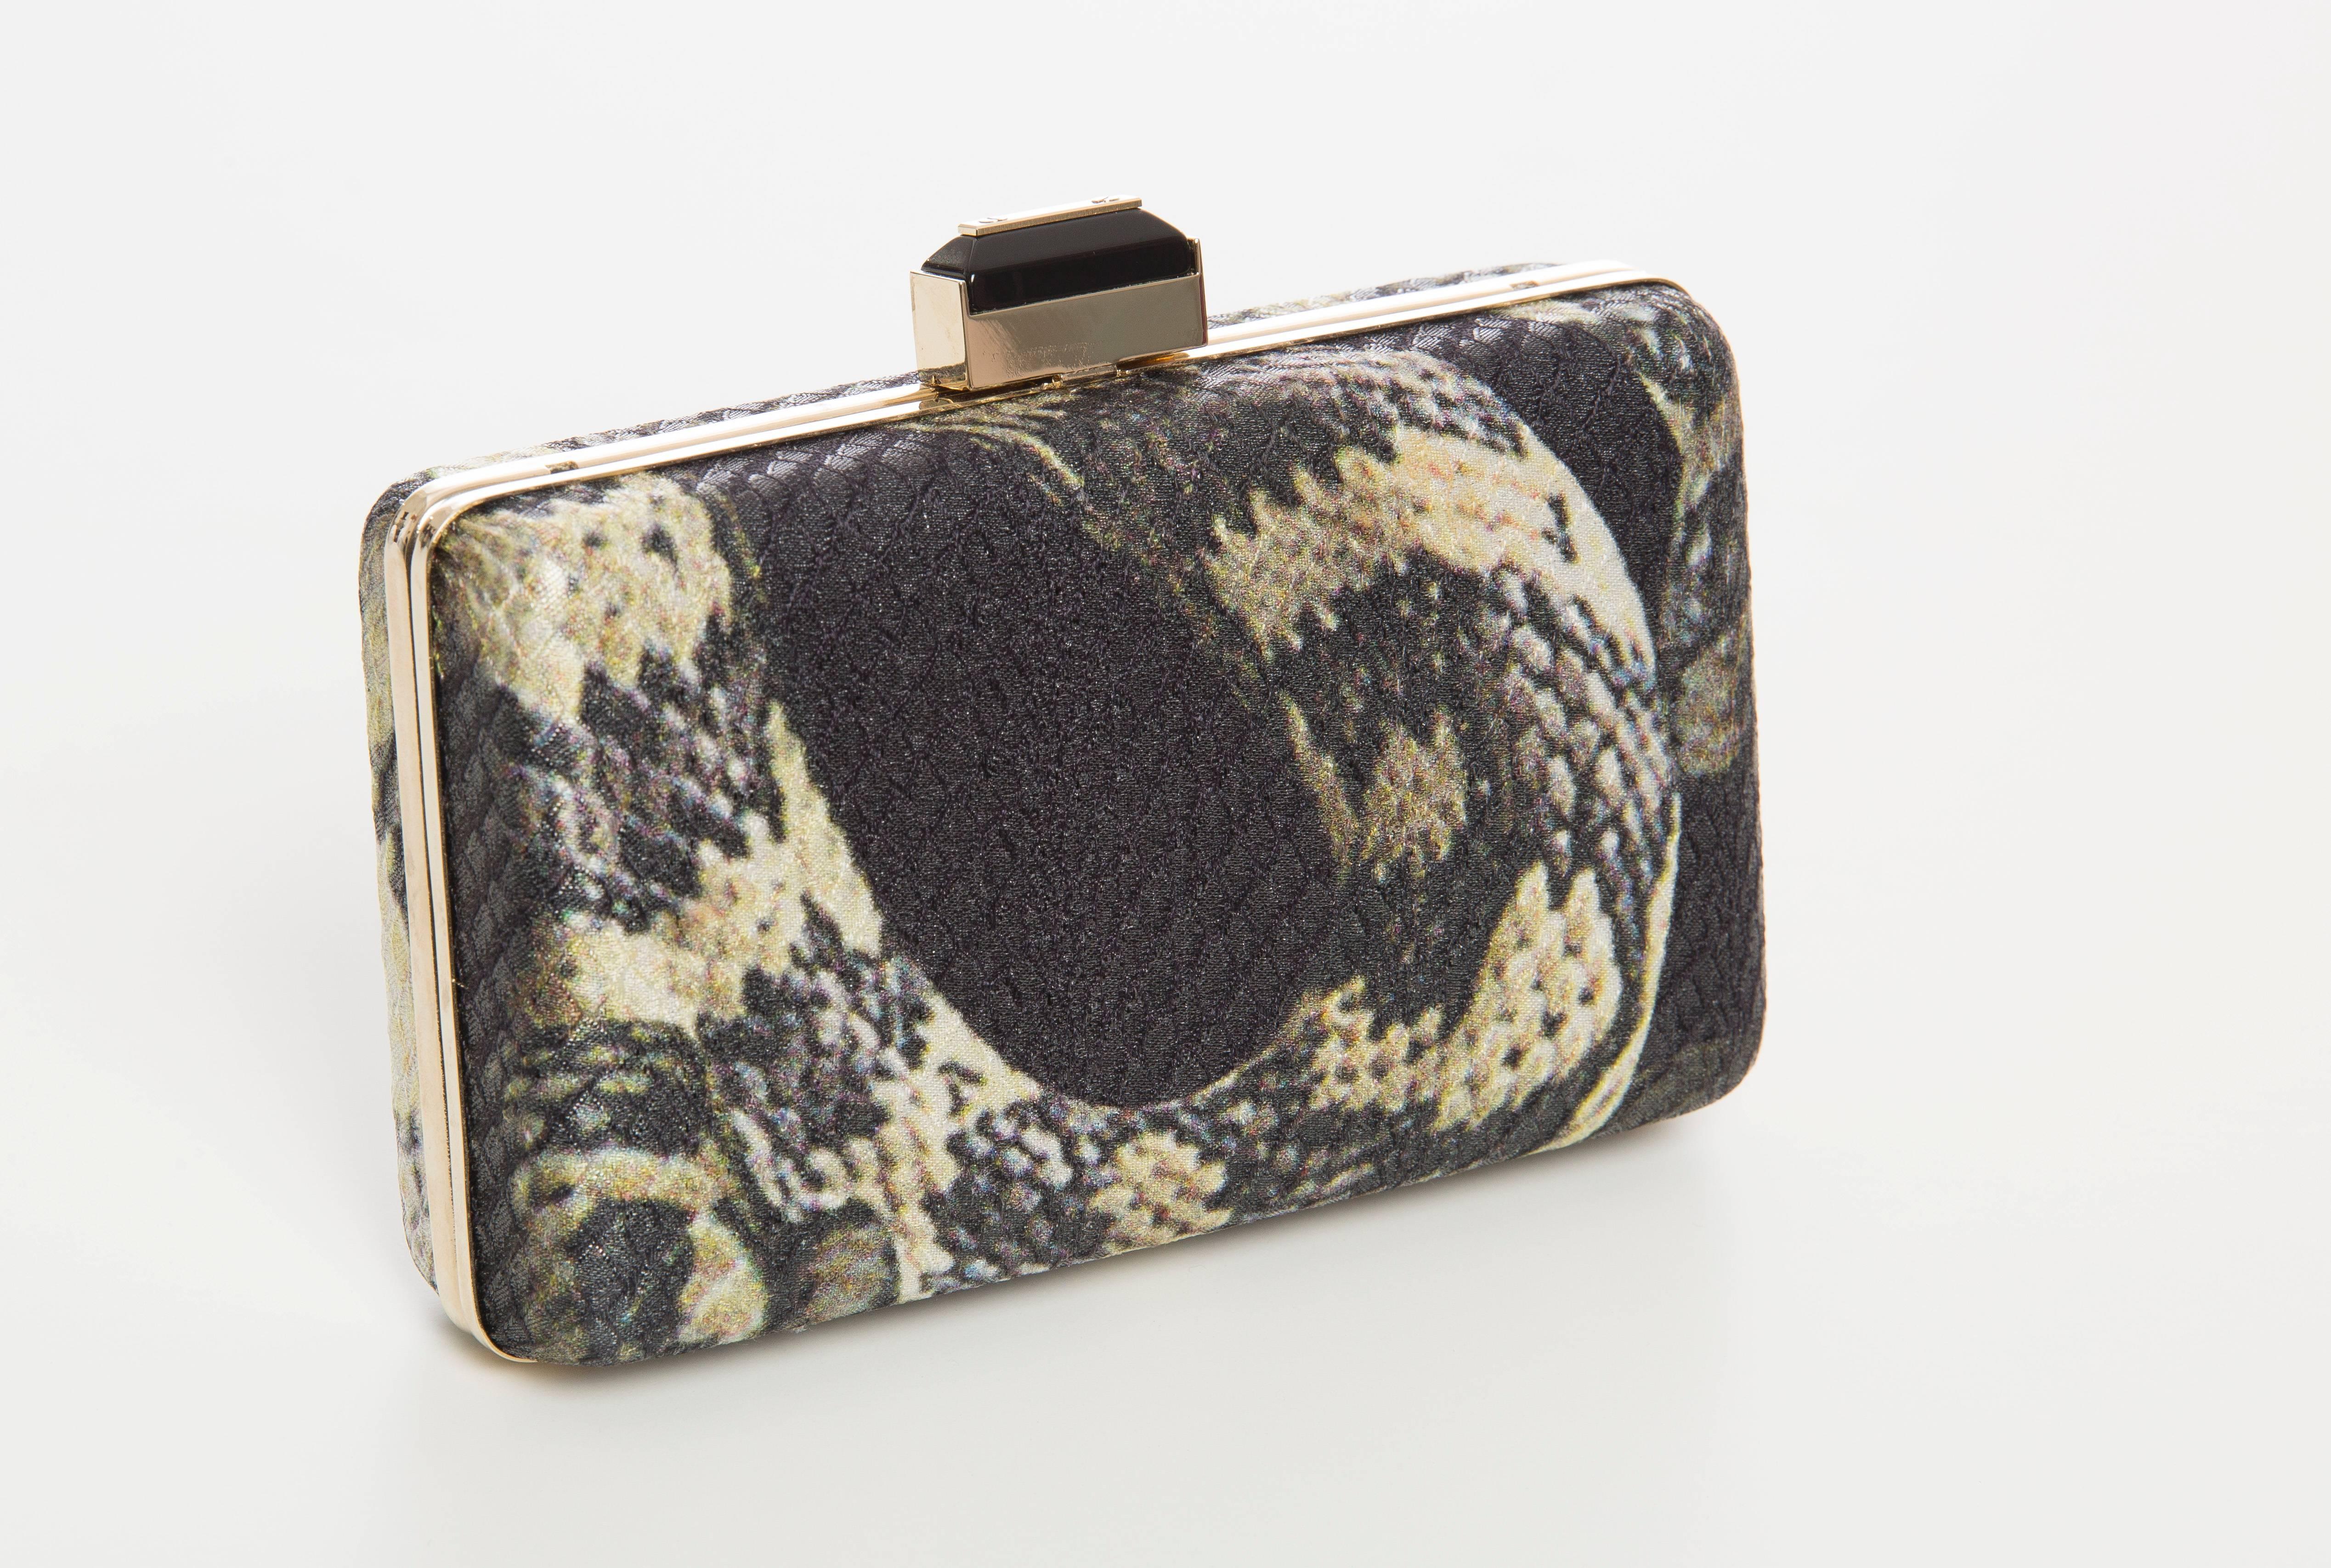 Lanvin by Alber Elbaz, Spring-Summer 2012, python print minaudière clutch with gold-tone hardware, single drop-in shoulder strap, black satin lining and jeweled push-lock closure at top. Includes dust bag and tags.

Height 4”, Width 6”, Depth 2”